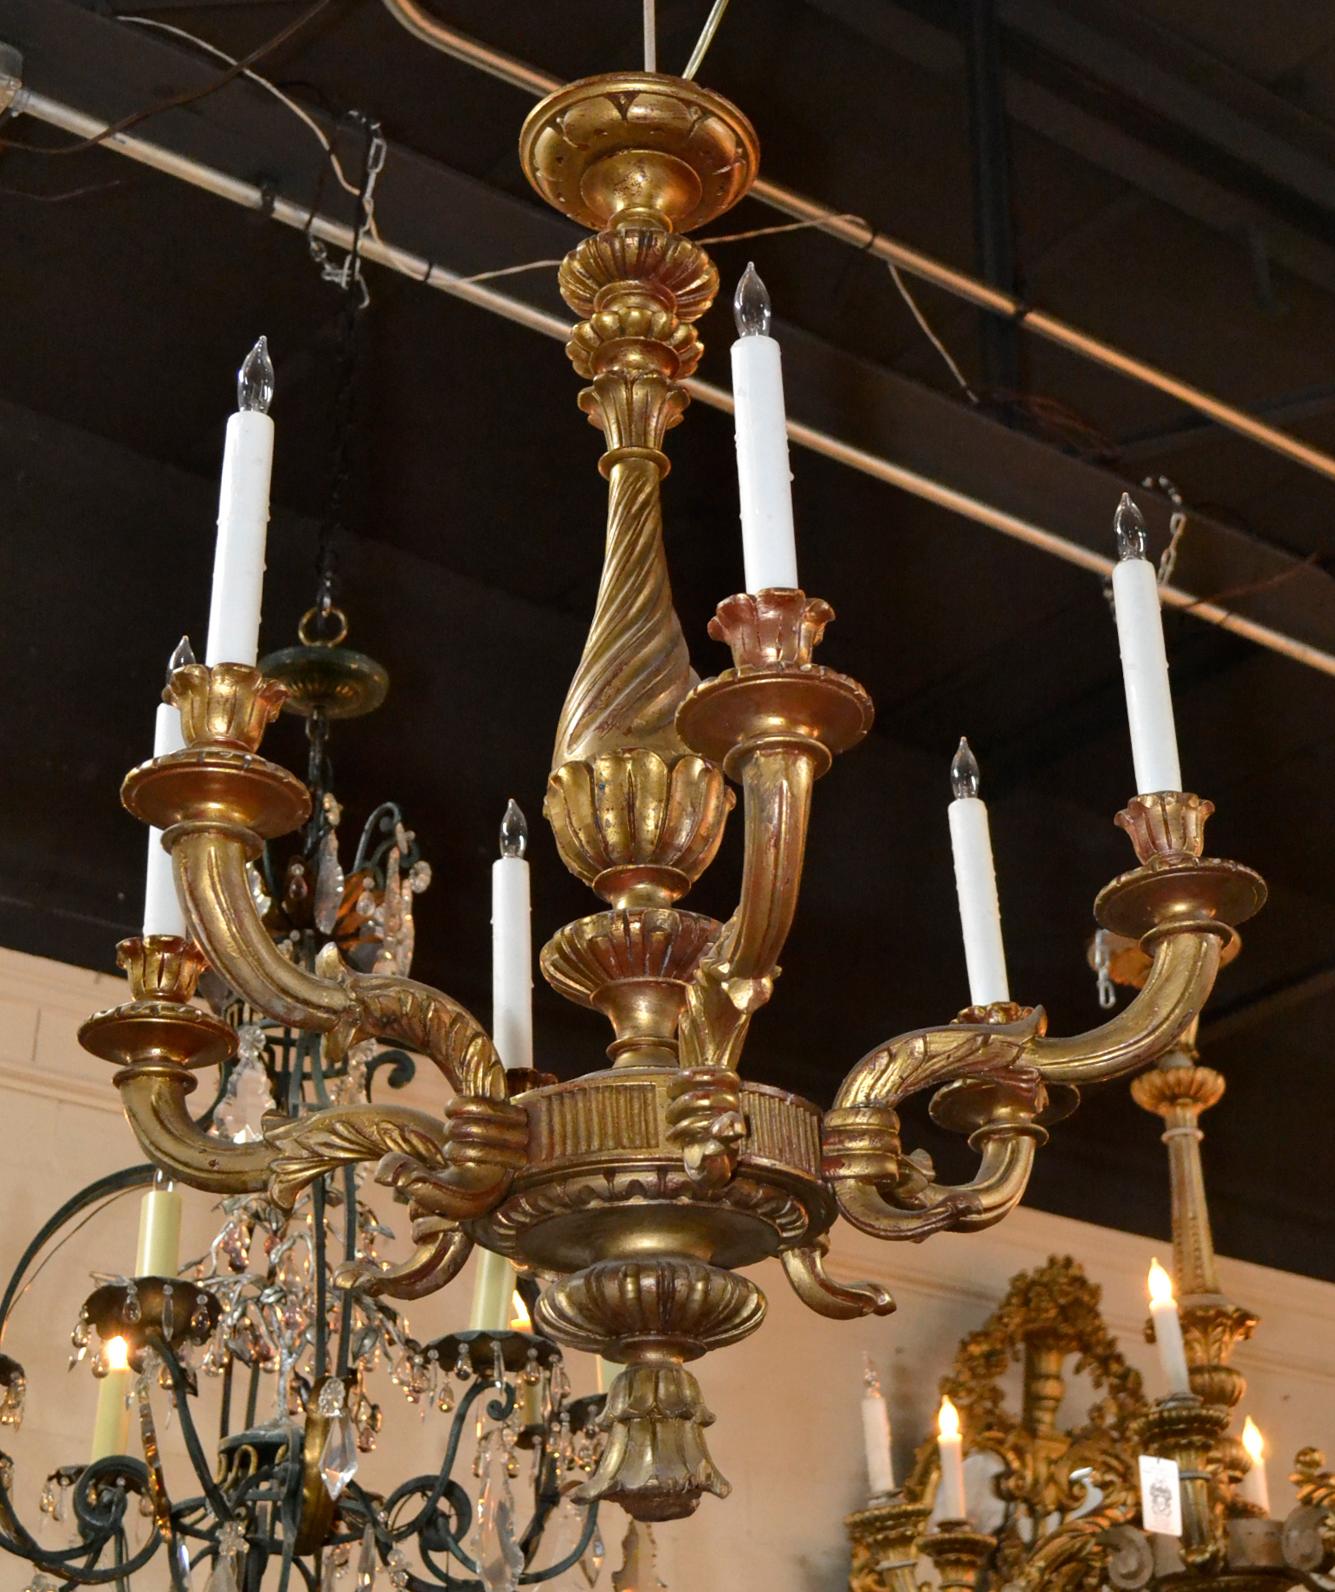 19th Century French Carved Wood Chandelier (Vergoldetes Holz)